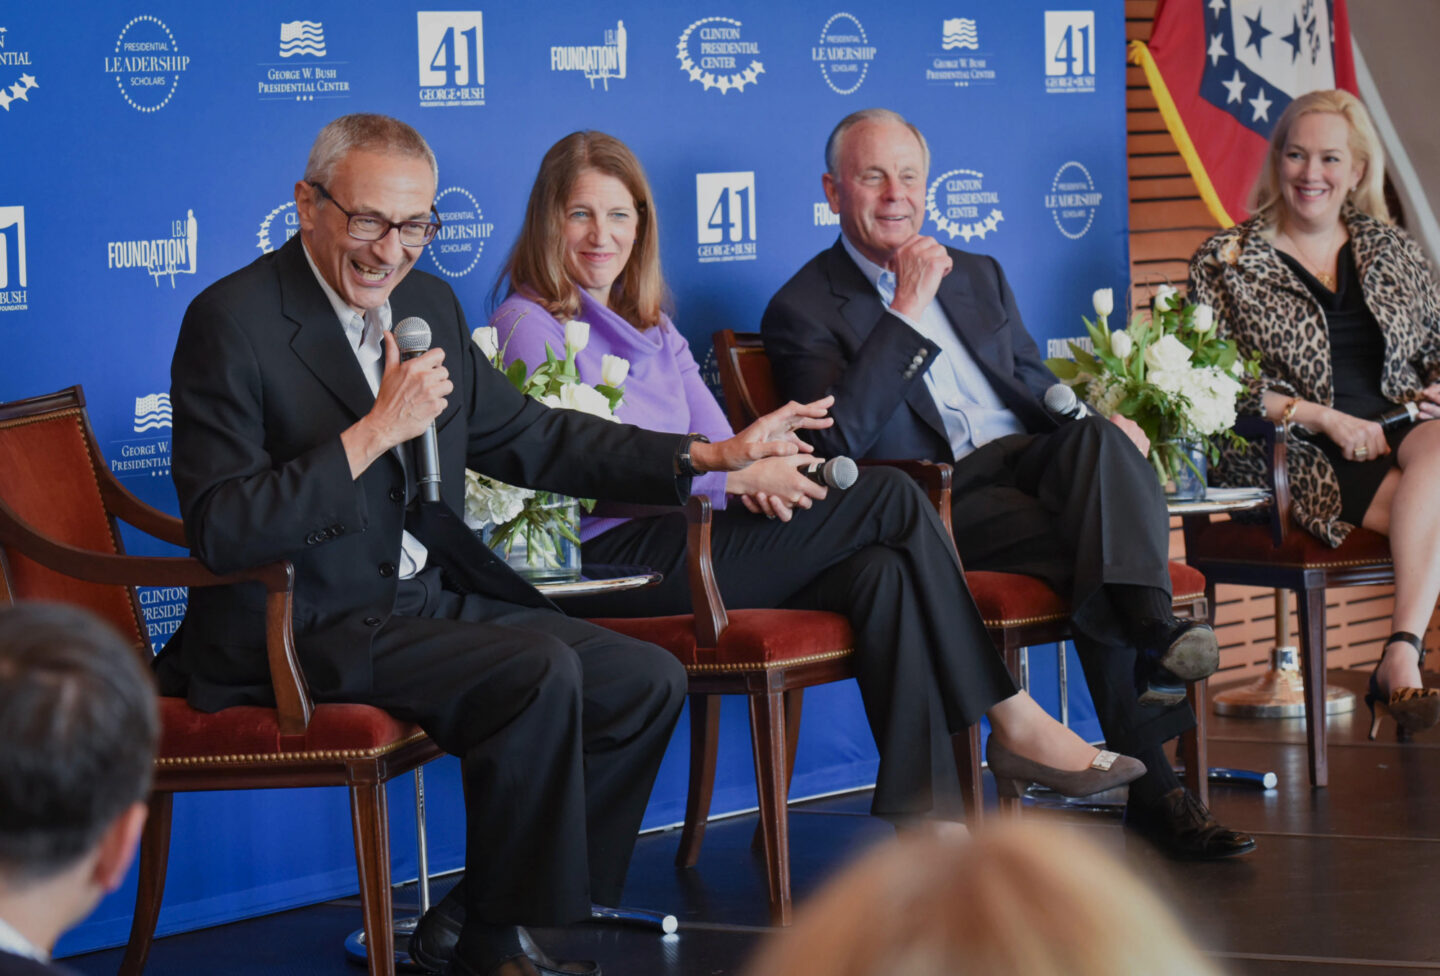 John Podesta, Sylvia Matthews Burwell, Mack McLarty, and Stephanie Streett participate in a panel discussion.